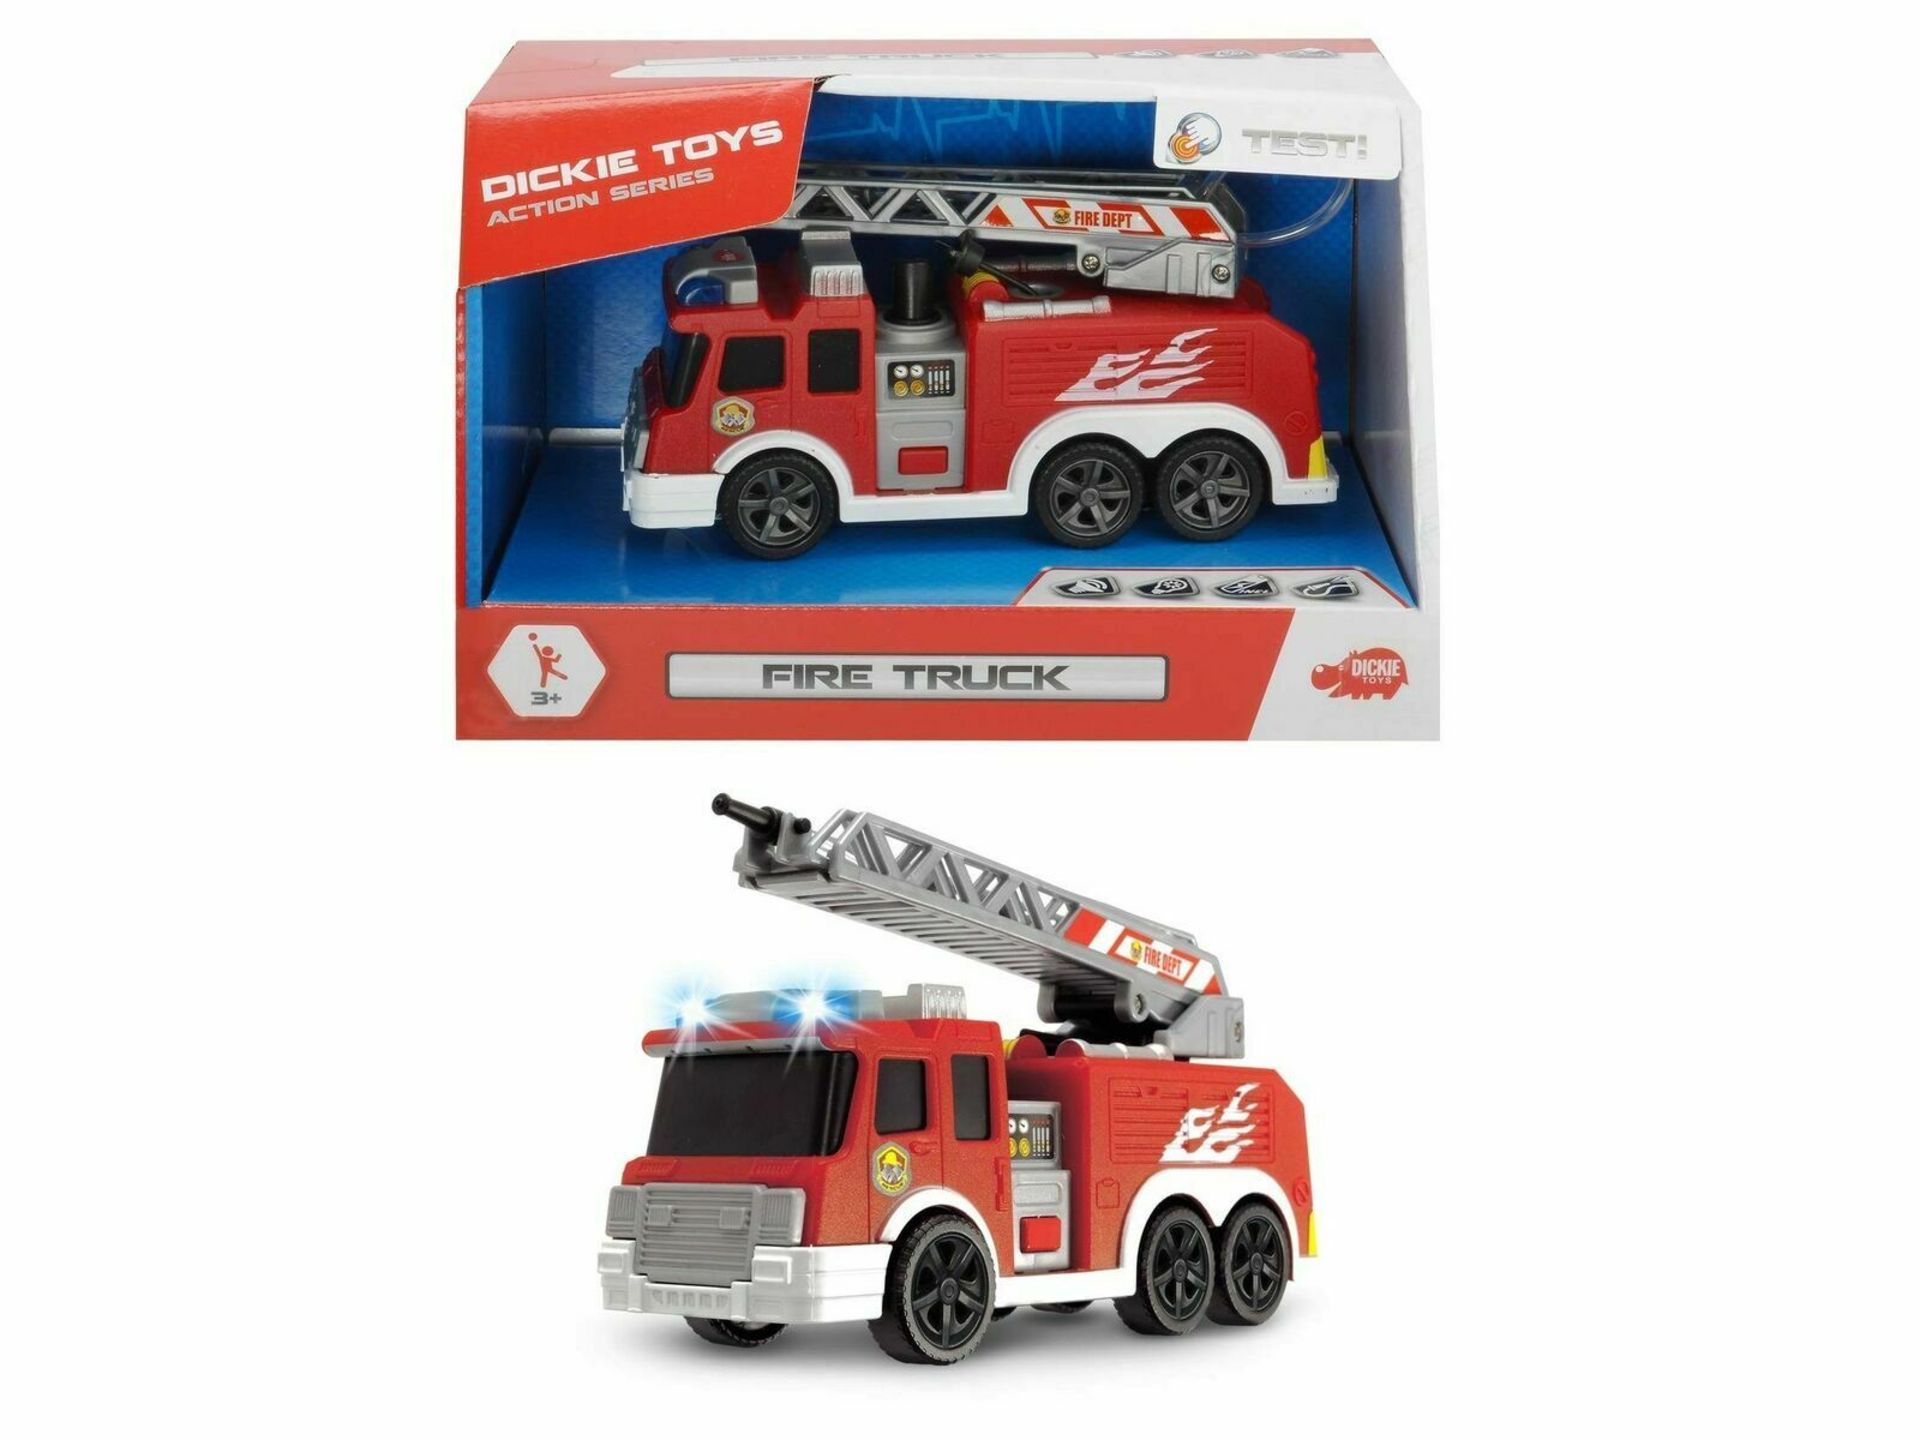 200 x Brand New Dickies Fire Engine Toy w/ Water Cannon - Image 2 of 7